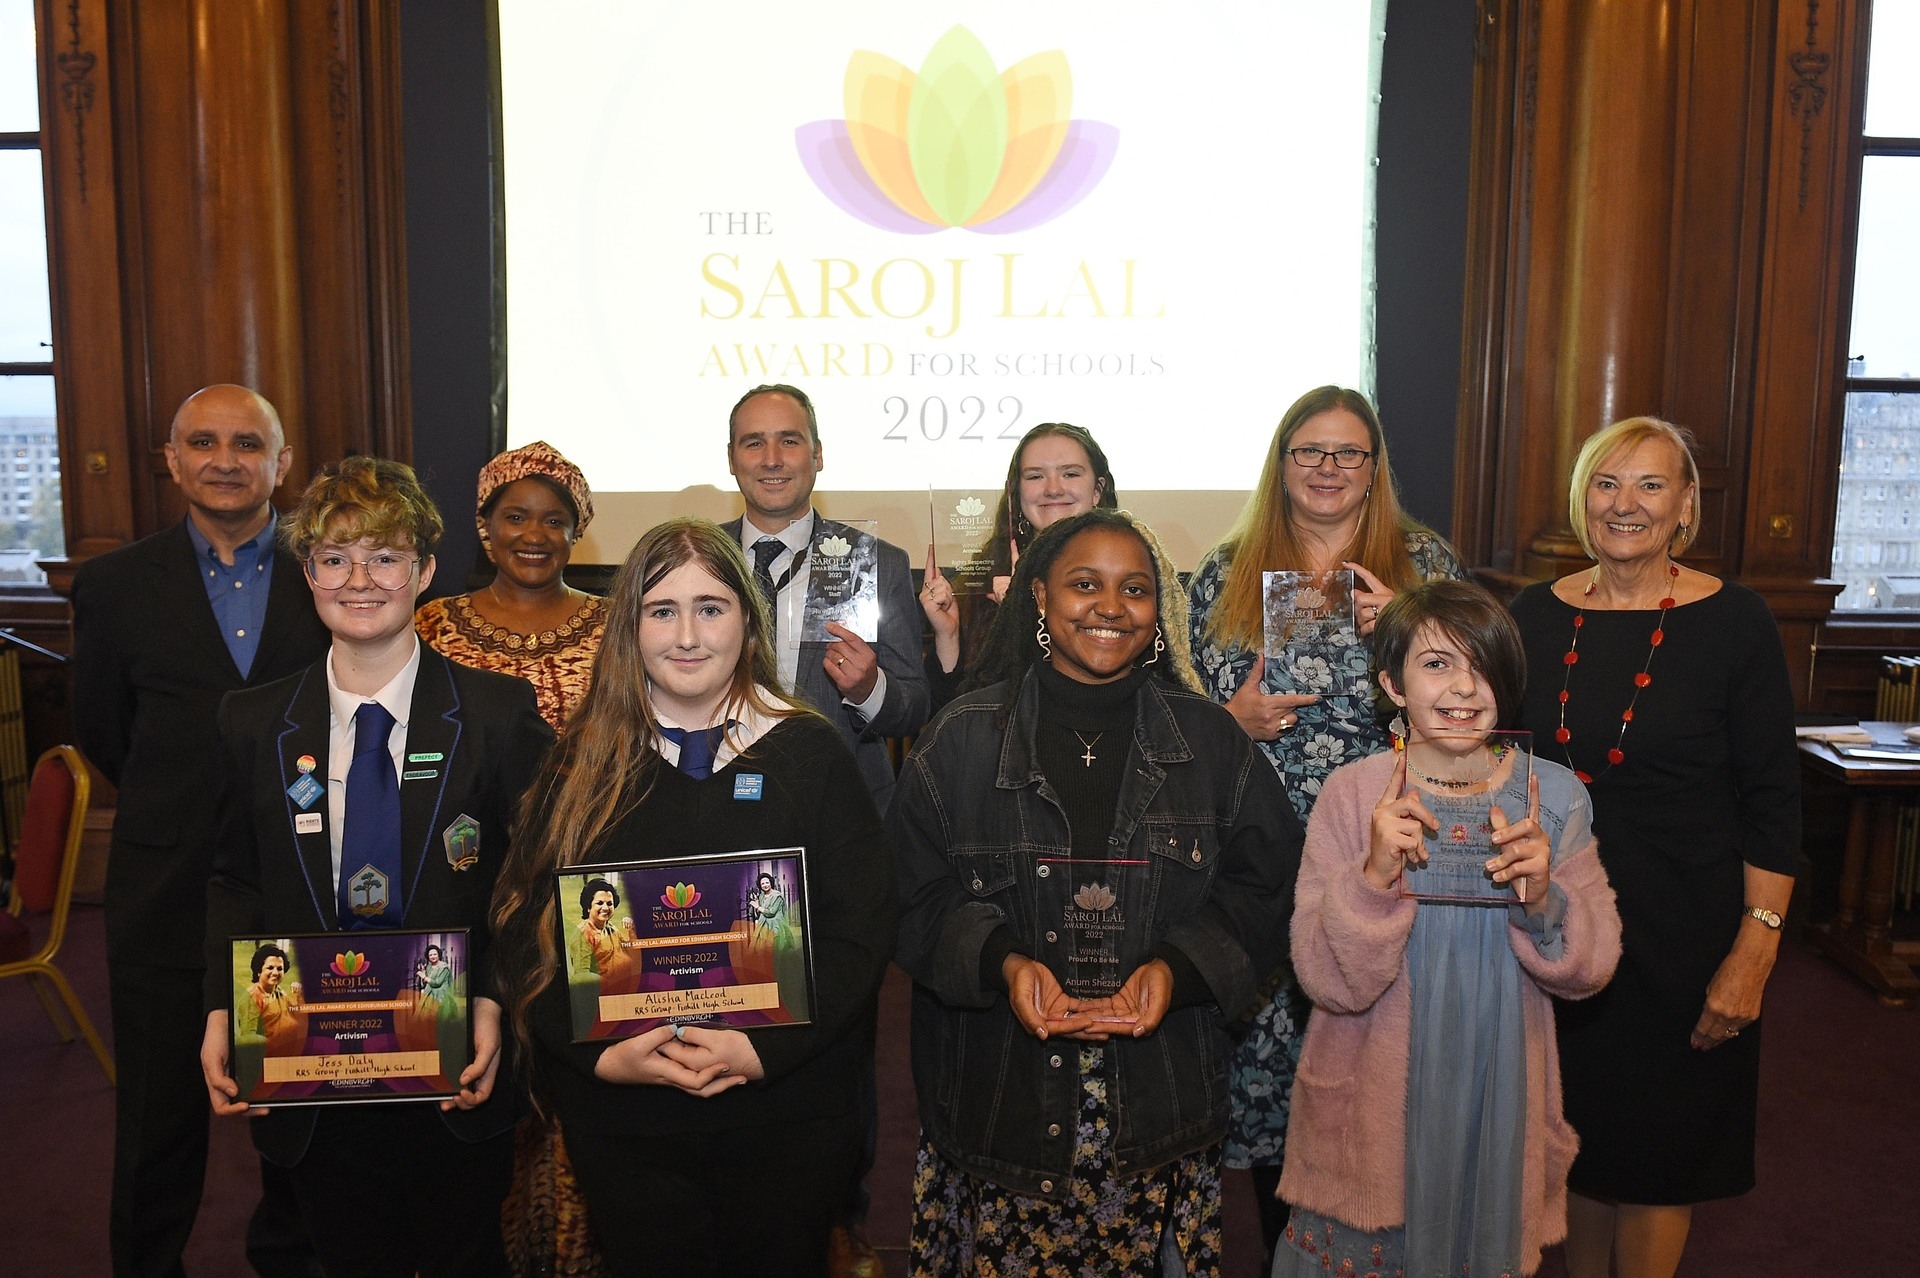 Saroj Lal Awards 2022 presented to pupils and teachers at the City Chambers in Edinburgh.